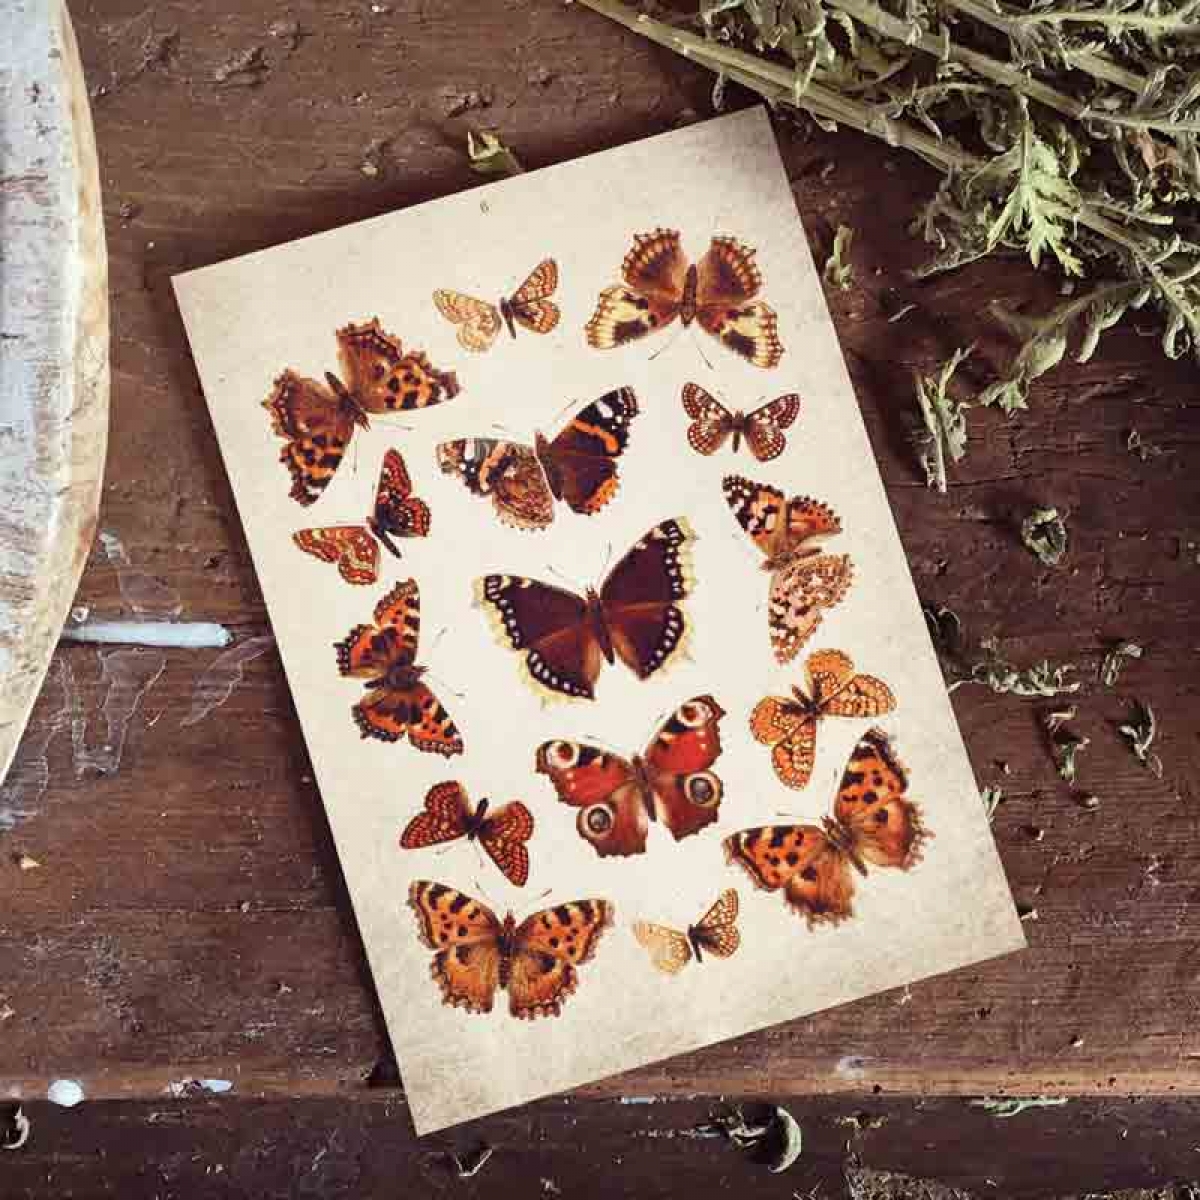 Vintage Entomology Giclee Print (British Butterflies Plate From 1837)